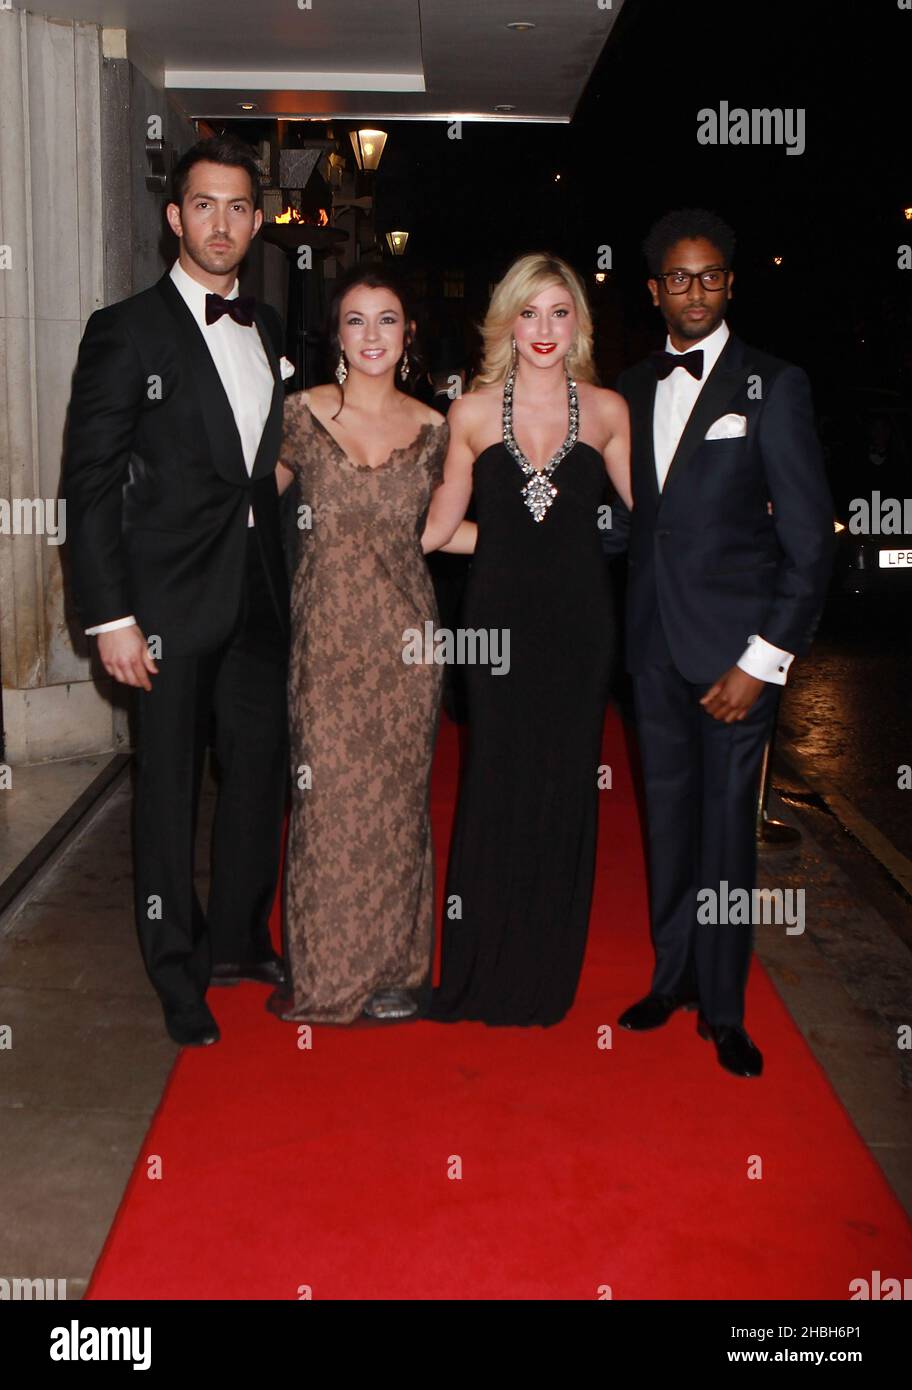 David Webb, Monica McGhee, Victoria Gray and Peter Braithwaite of Amore Tribute Band attend the Helping Hands VIP fundraising dinner at the Savoy Hotel in London. Stock Photo